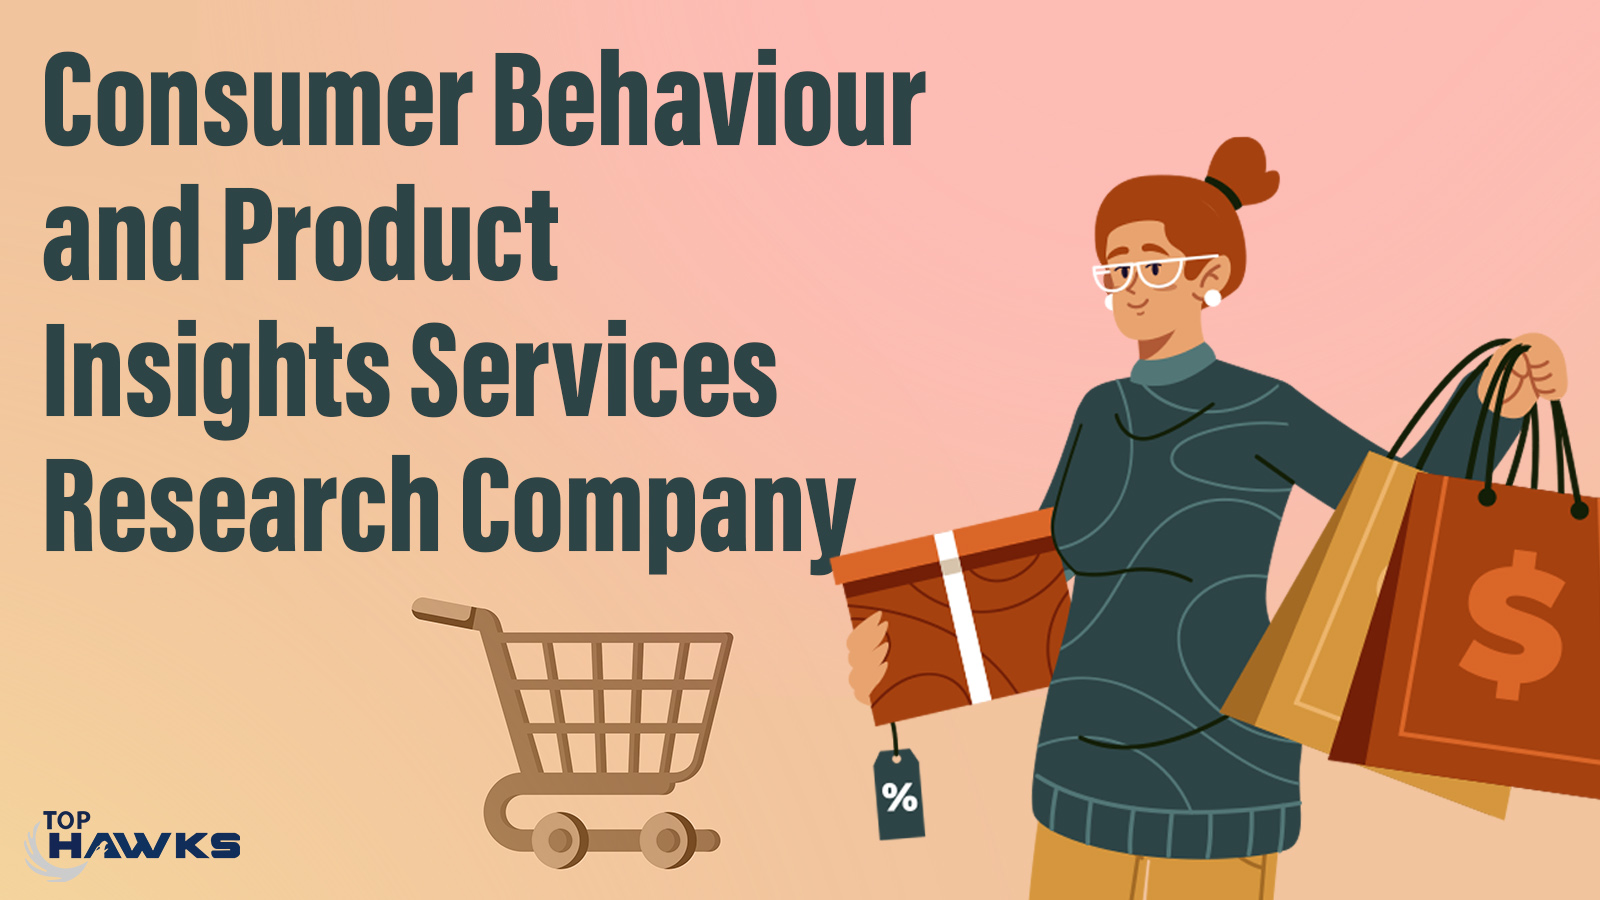 Consumer Behaviour and Product Insights Services Research Company banner